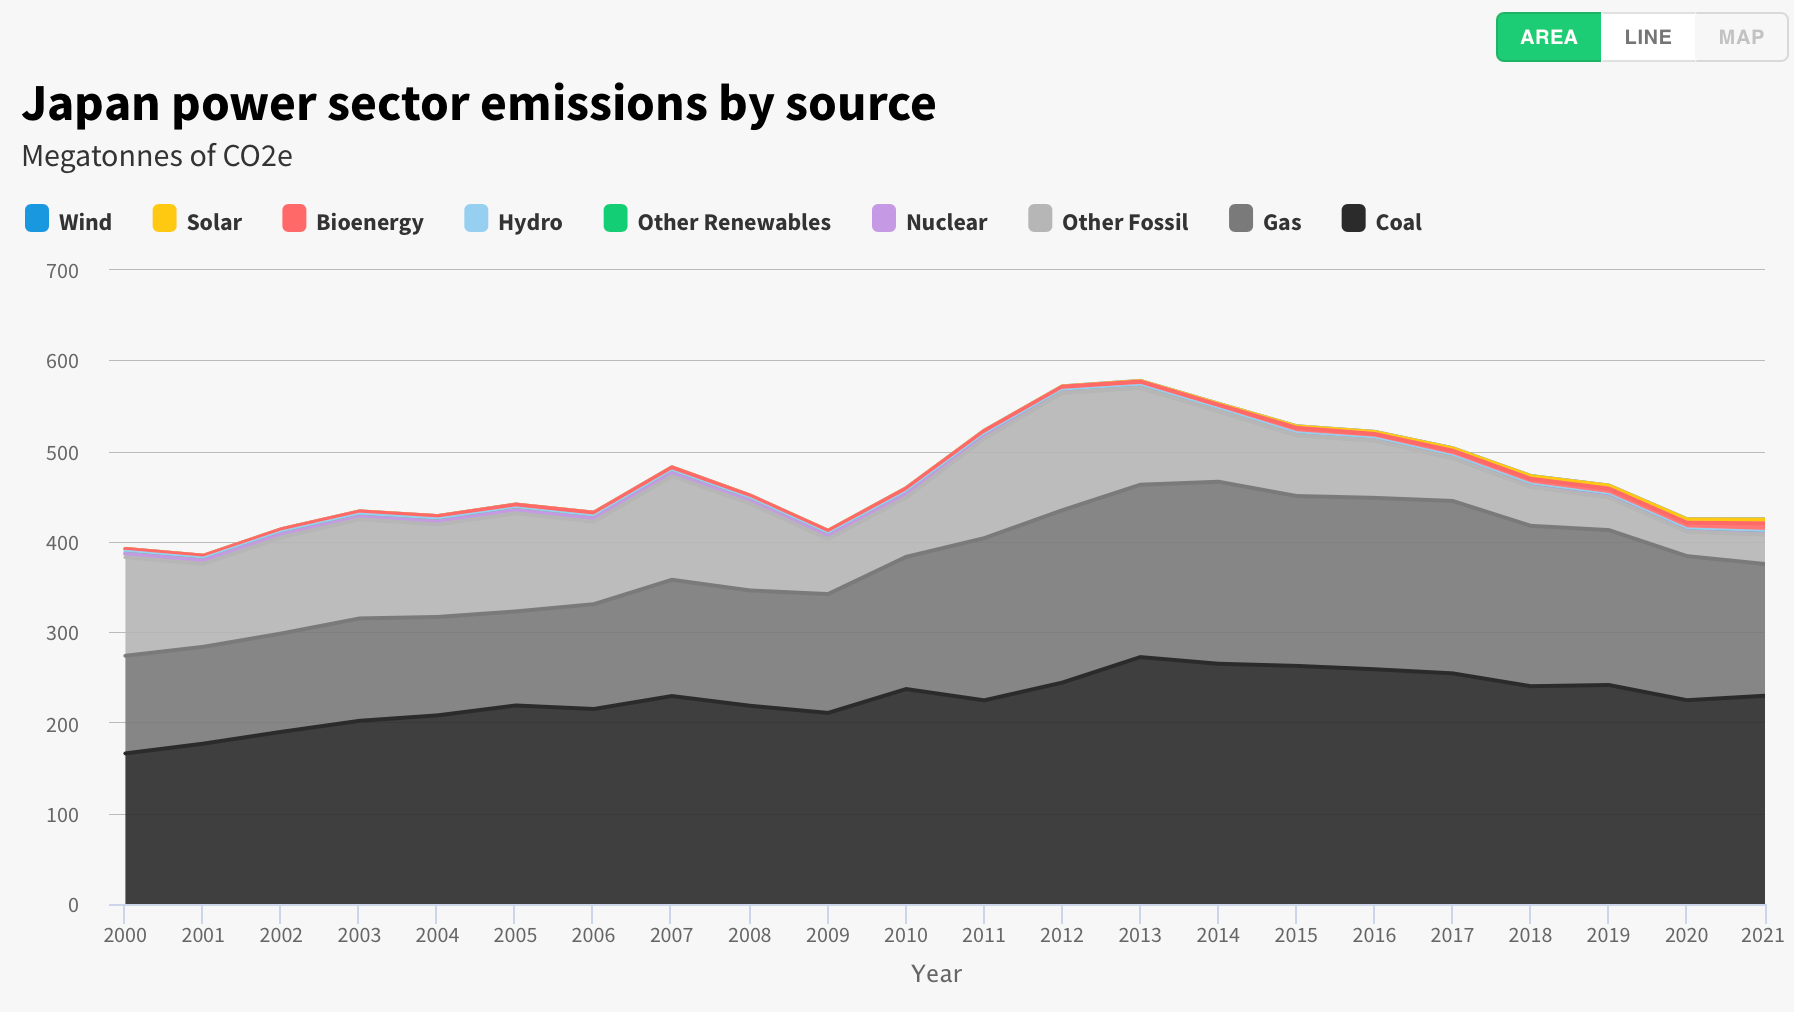 A chart of Japan power sector emissions by source, showing a big jump in emissions in 2011, peaking in 12-13 and declining slowly in the years following